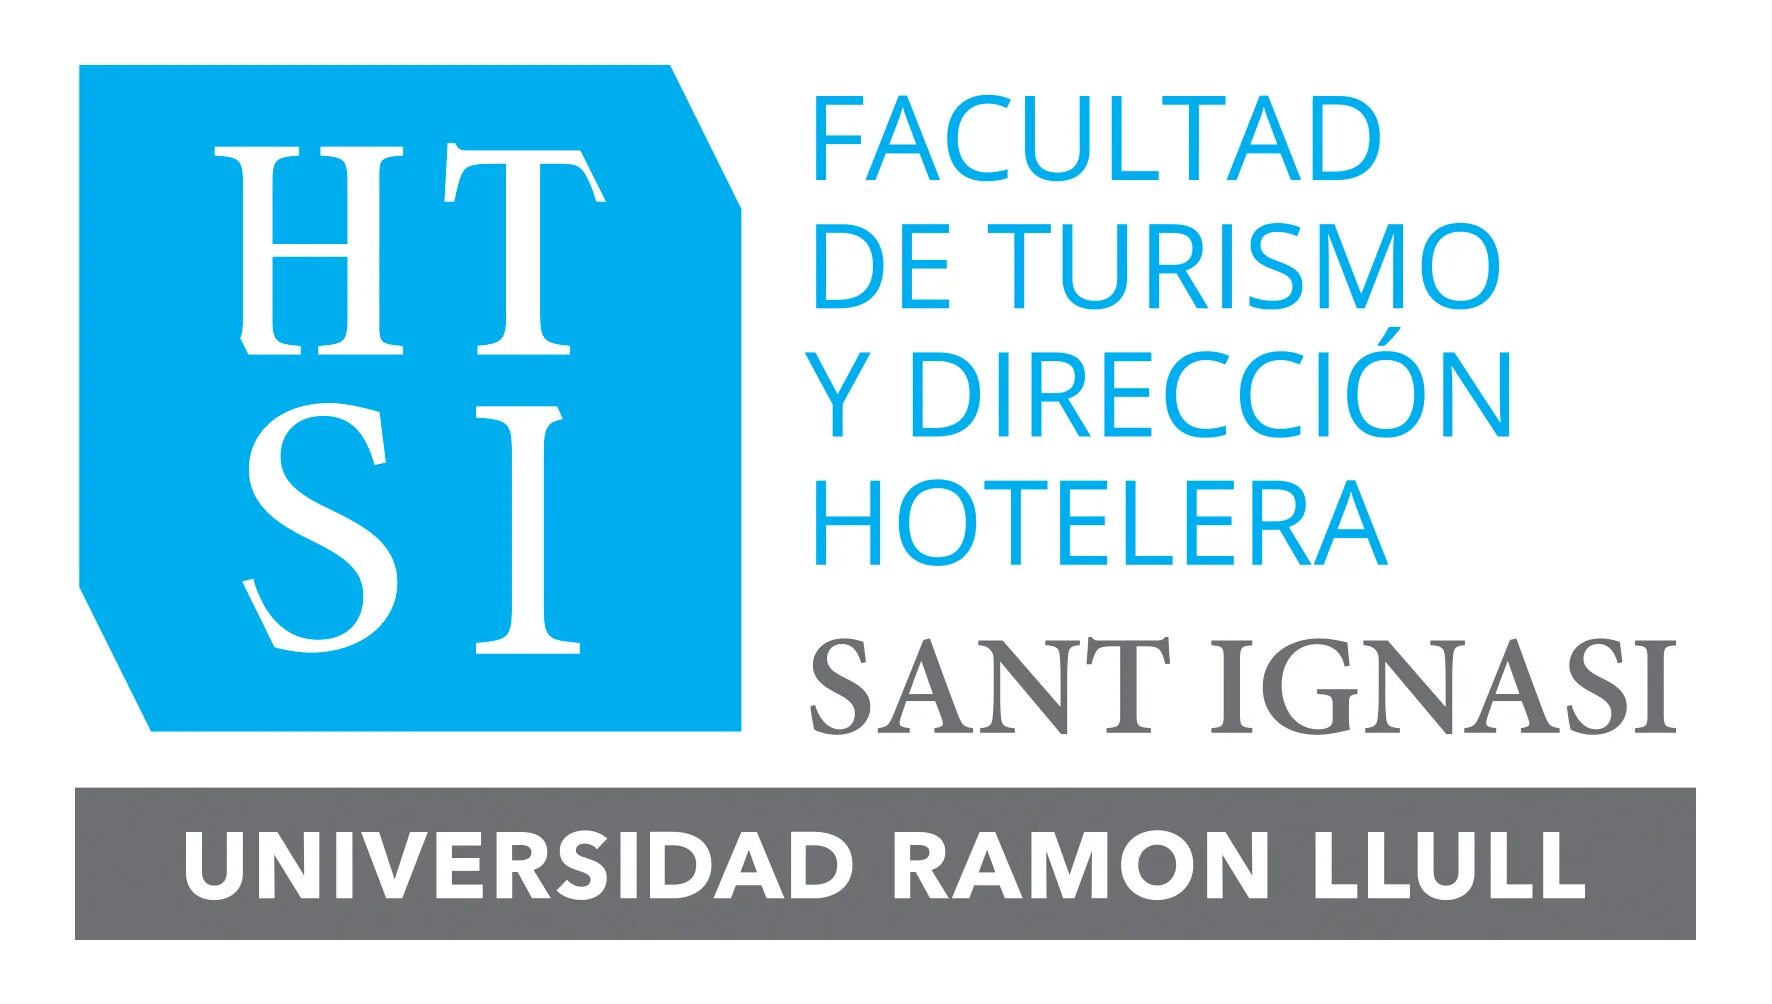 Tourism and hospitality. Hospitality and Tourism. Профайл скул логотип. Hospitality and Tourism Management Faculty.